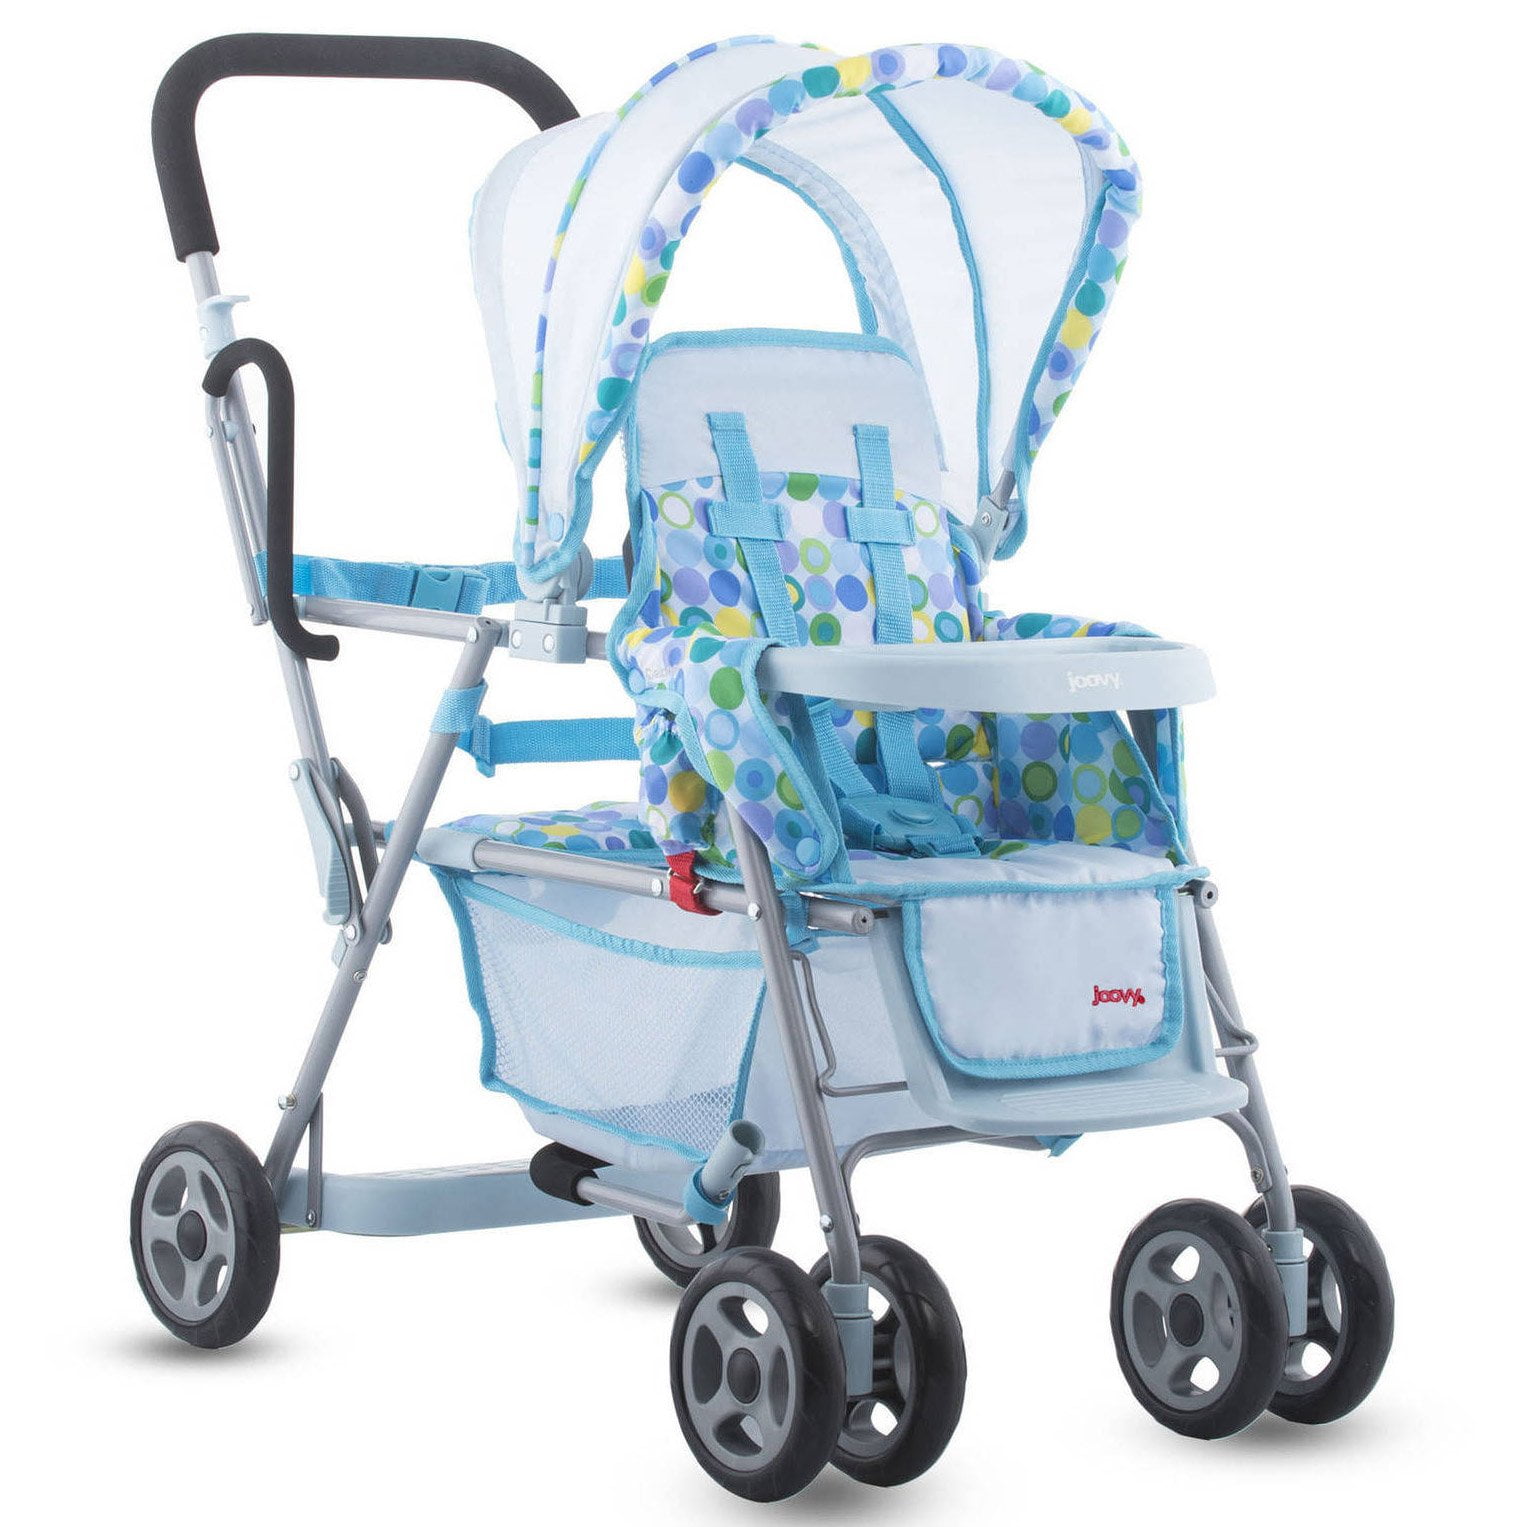 fisher price double stroller wagon